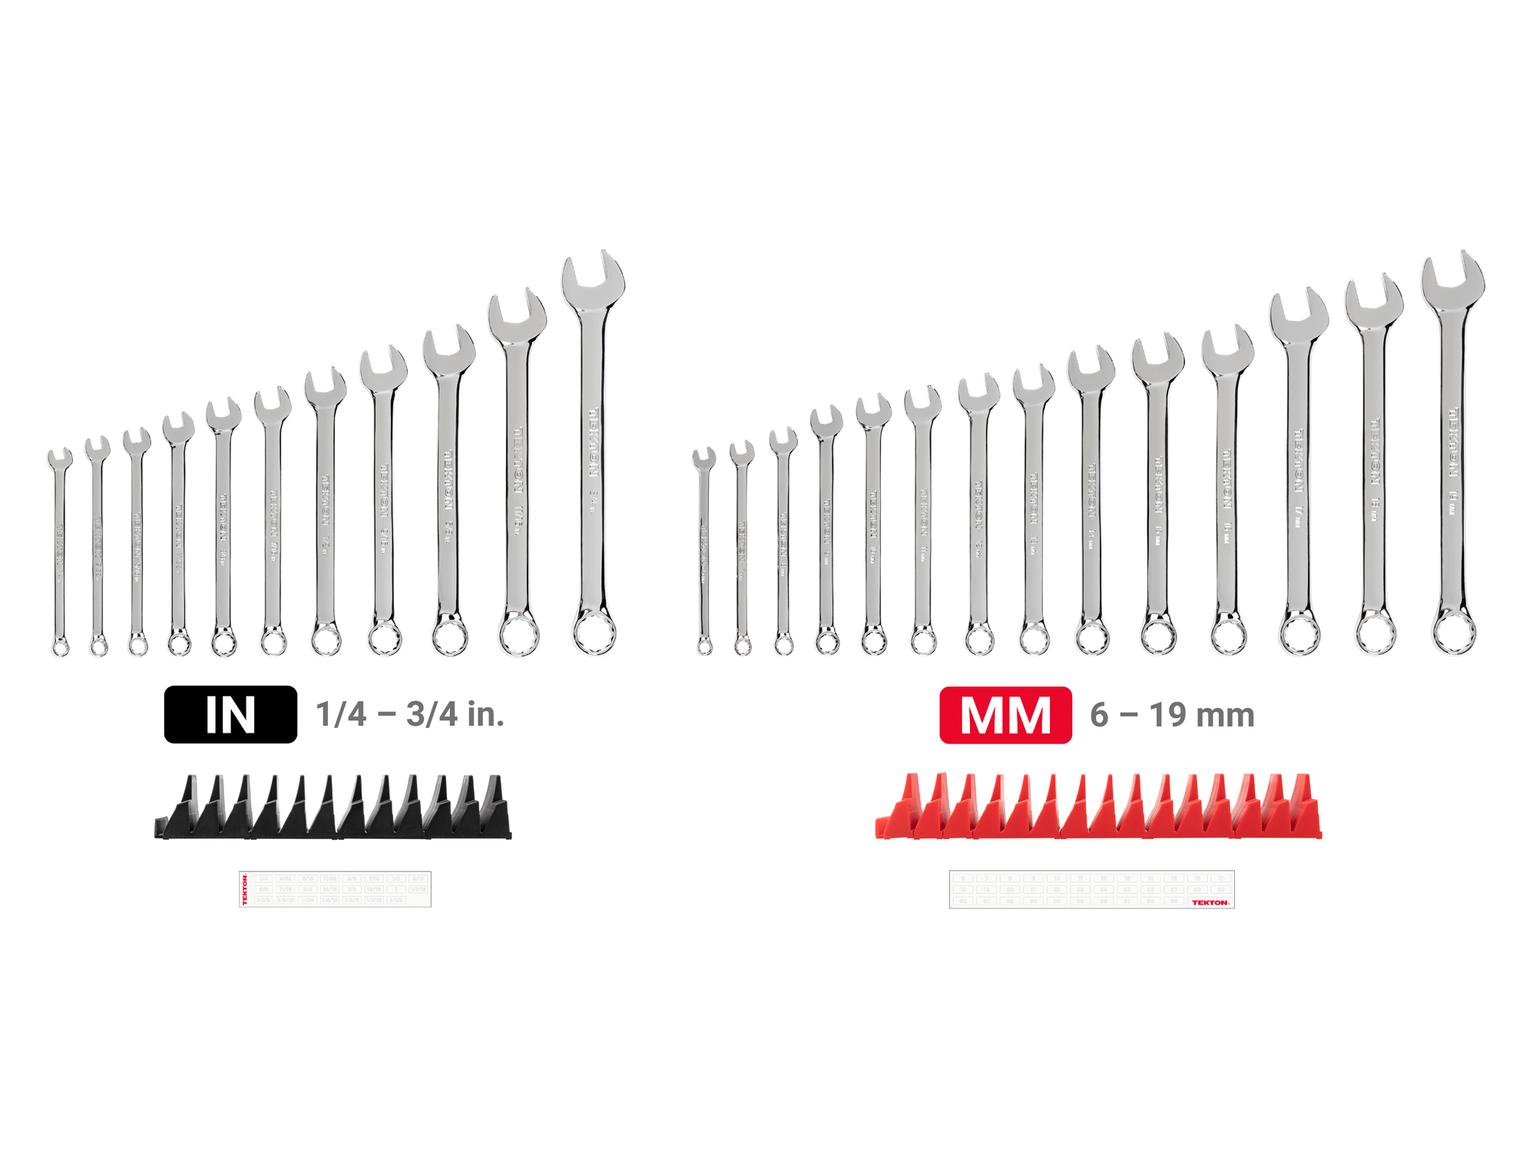 TEKTON WCB95301-T Combination Wrench Set with Modular Slotted Organizer, 25-Piece (1/4 - 3/4 in., 6 - 19 mm)